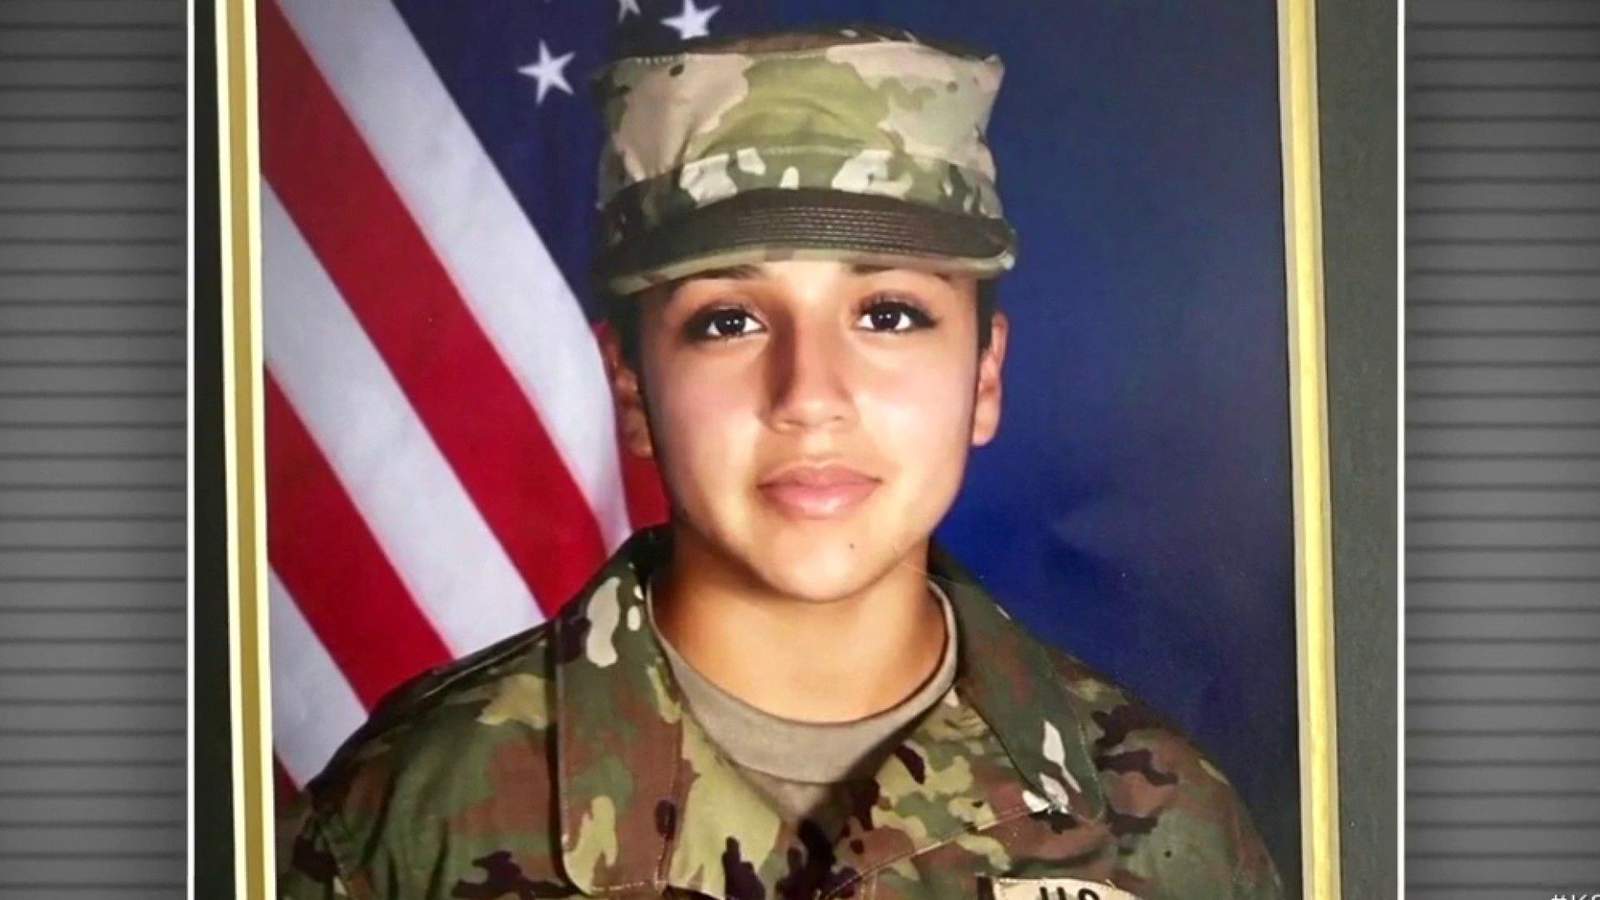 ‘We let her down‘: Secretary of Army discusses efforts to address death of Guillen, other soldiers